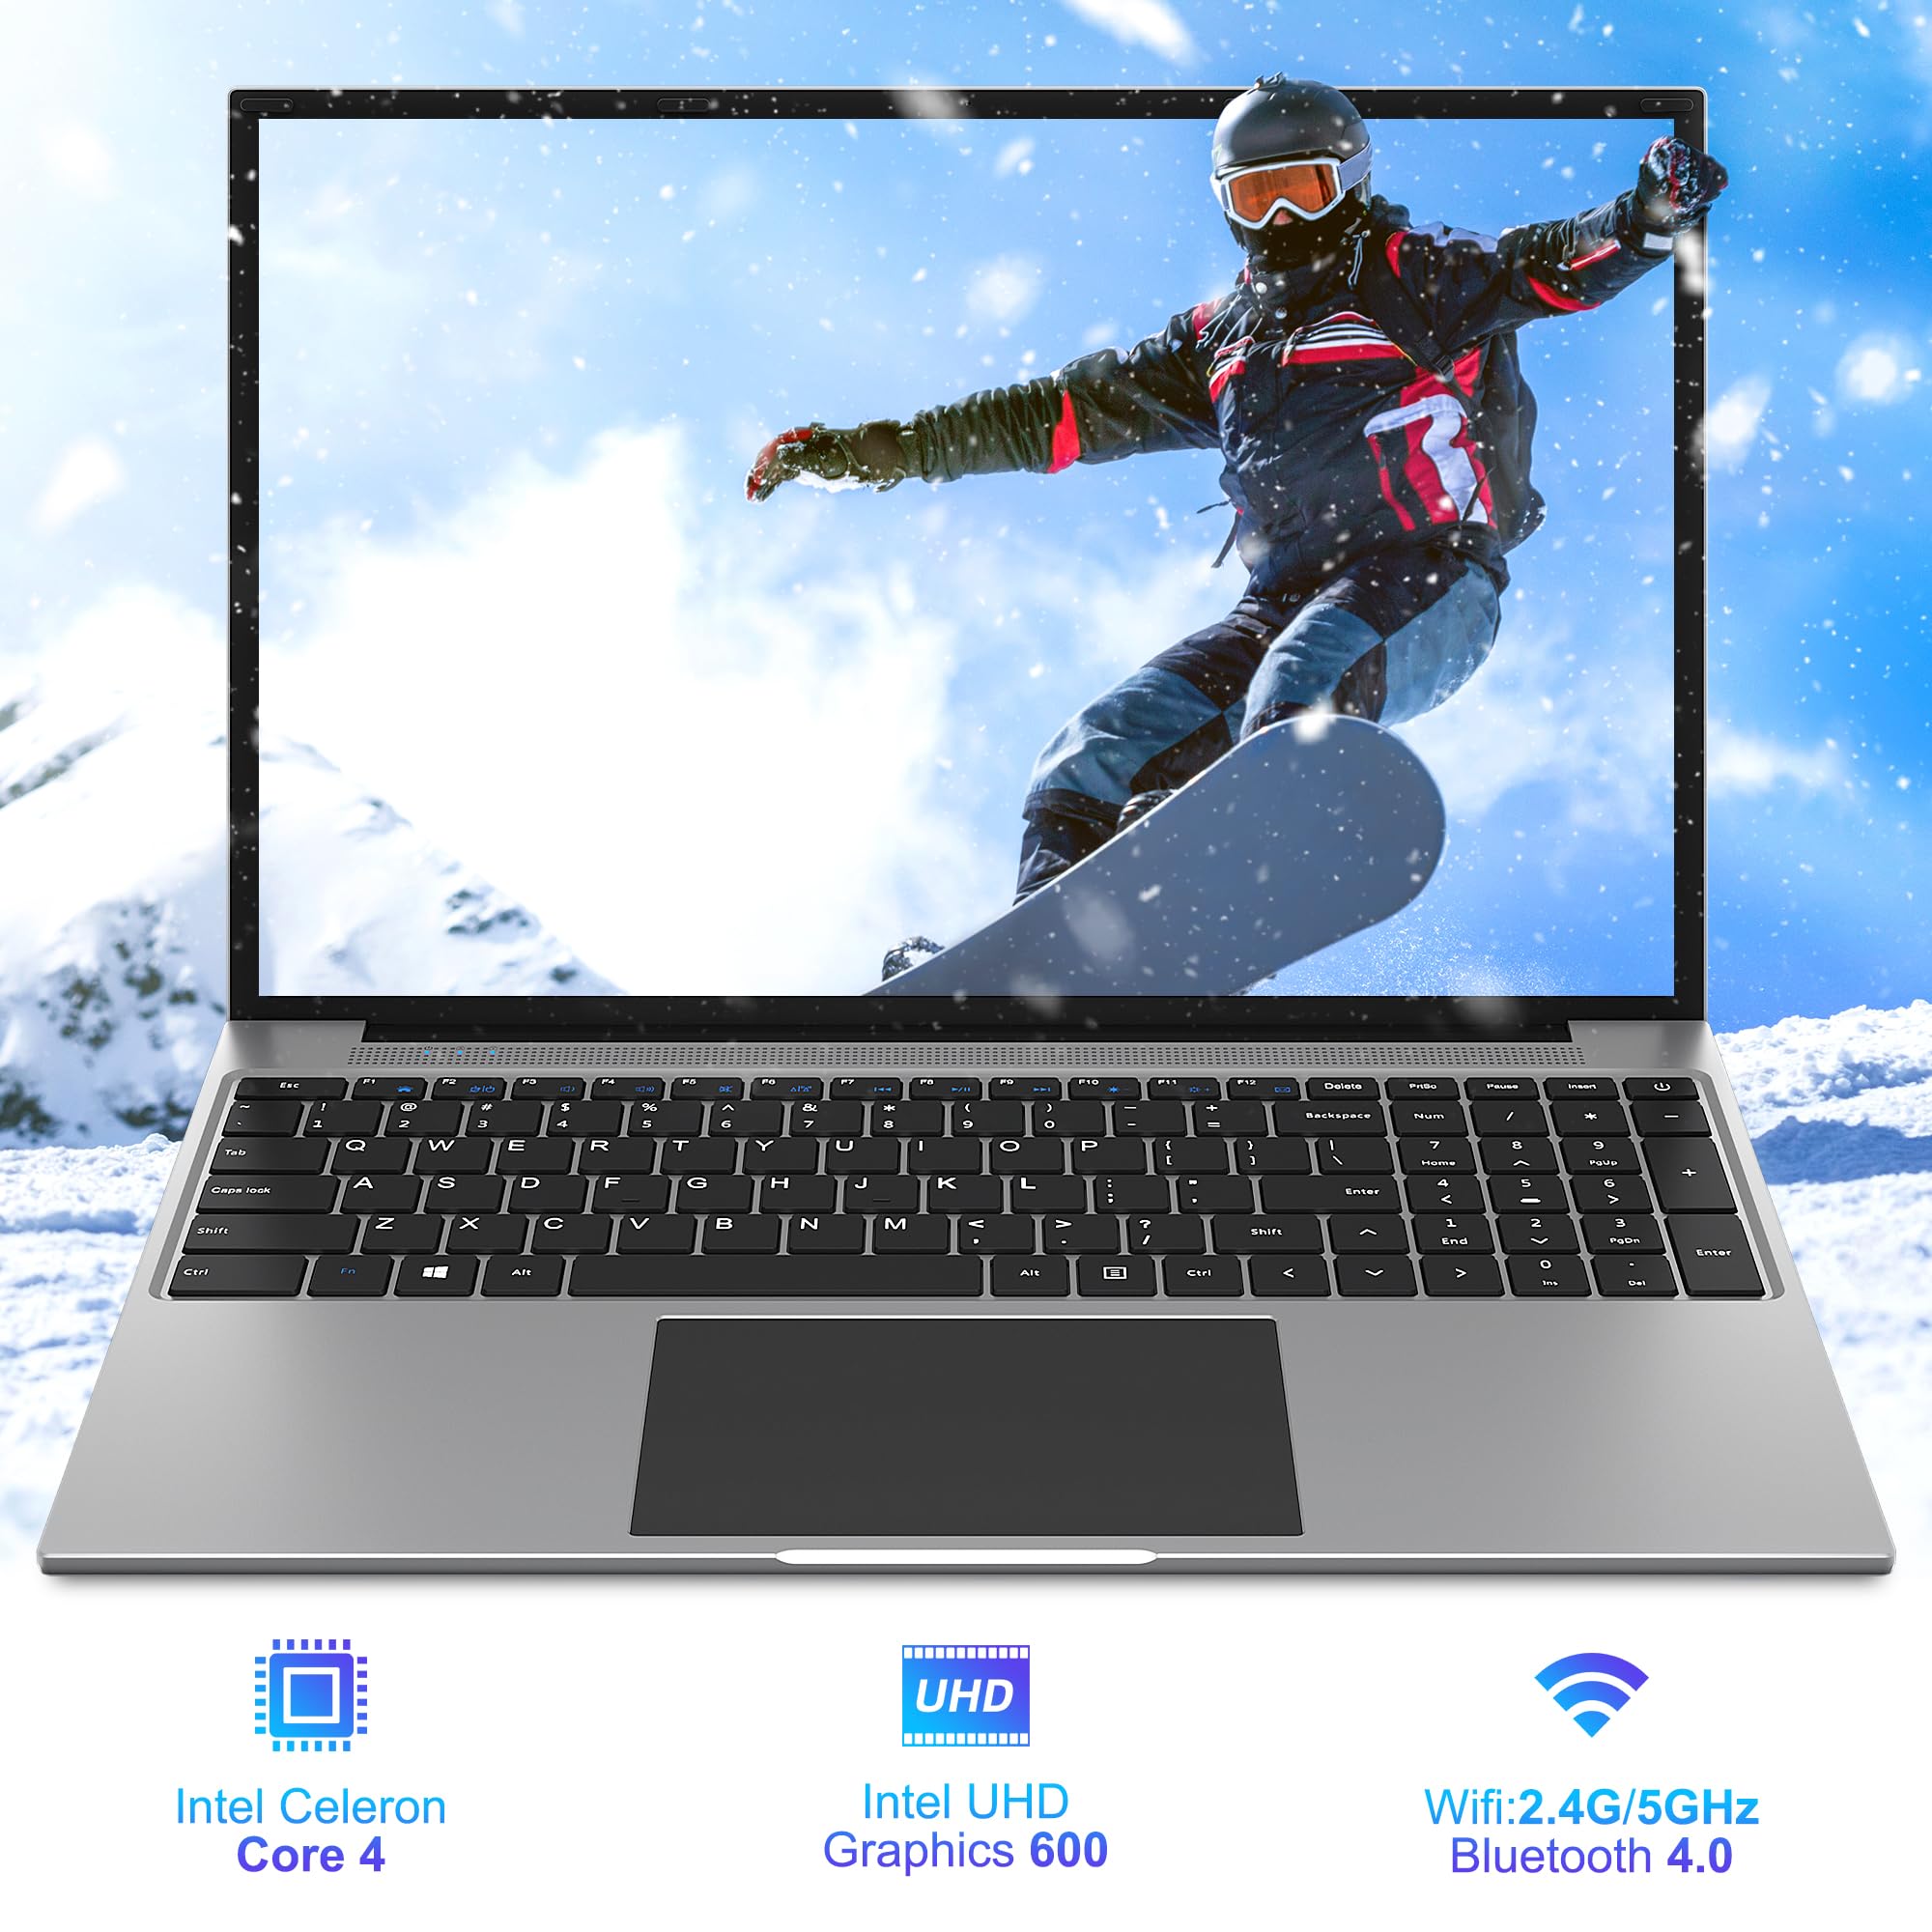 jumper Laptop 16 Inch FHD IPS Display (16:10), 4GB DDR4 128GB Storage, Intel Celeron Quad Core CPU, Laptops Computer with Office 365 1-Year Subscription Included, 4 Stereo Speakers, USB3.0.